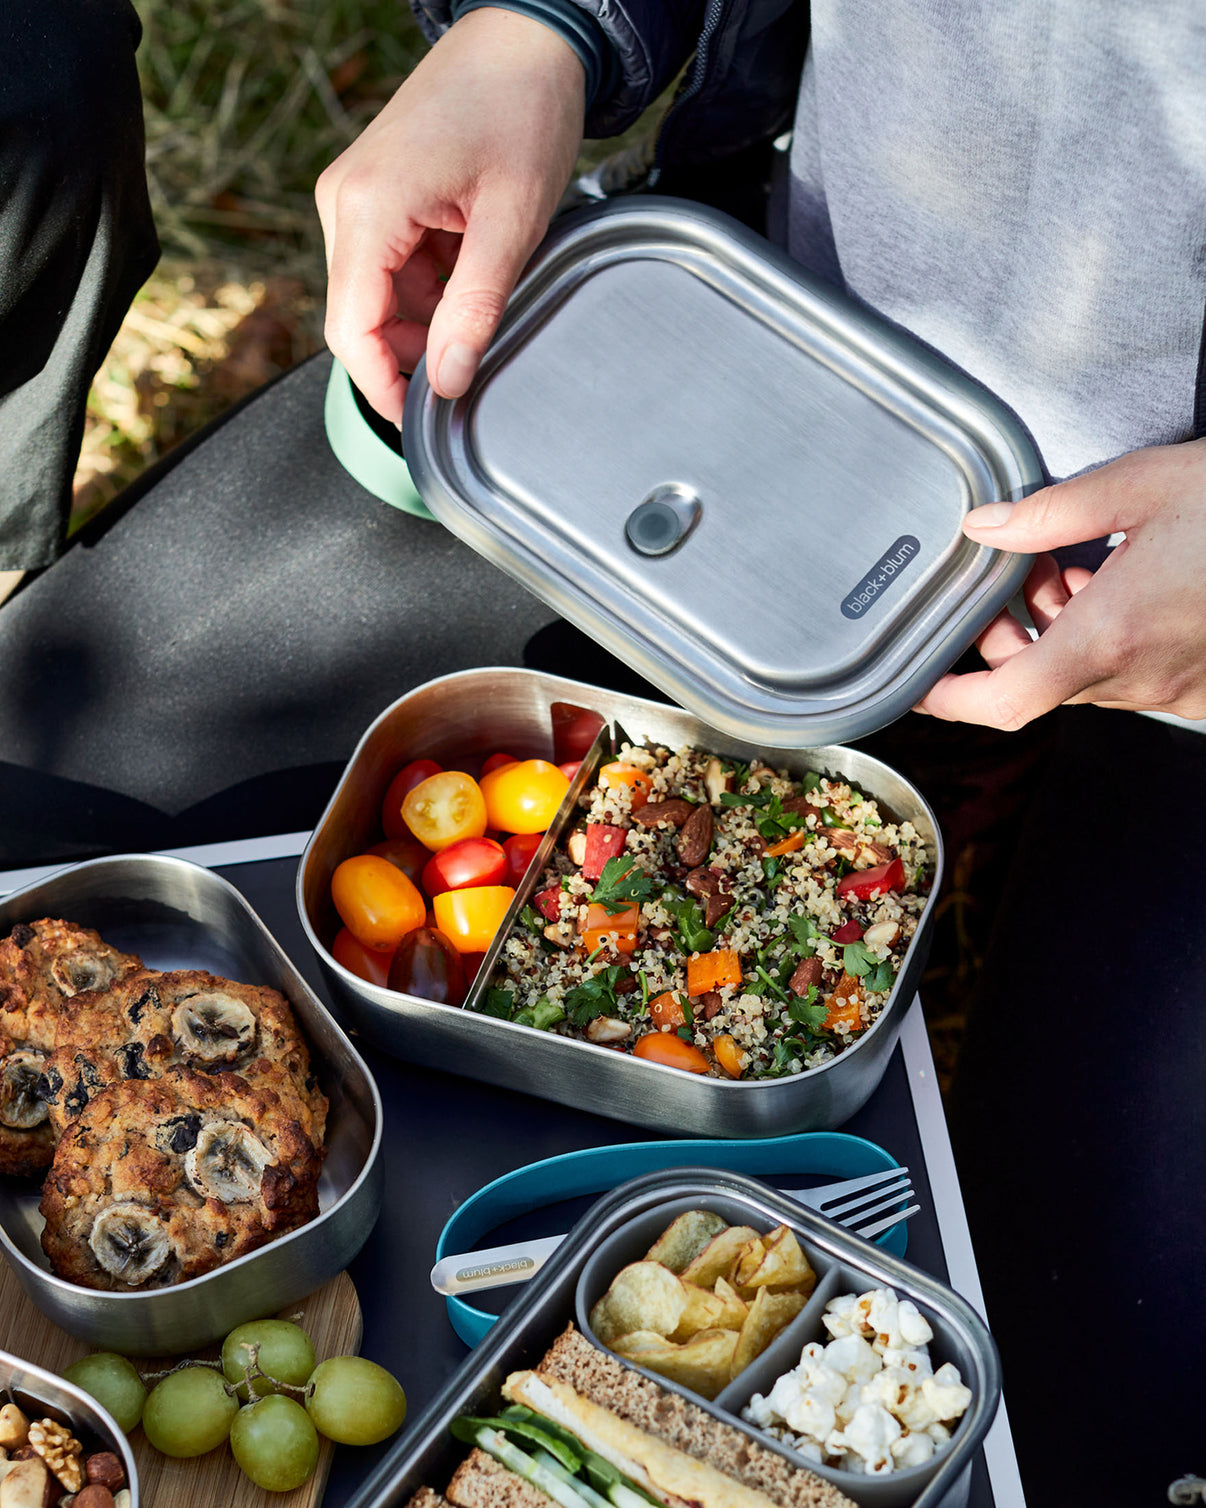 Stainless Steel Bento Box for Adults & Kids, Leakproof Large